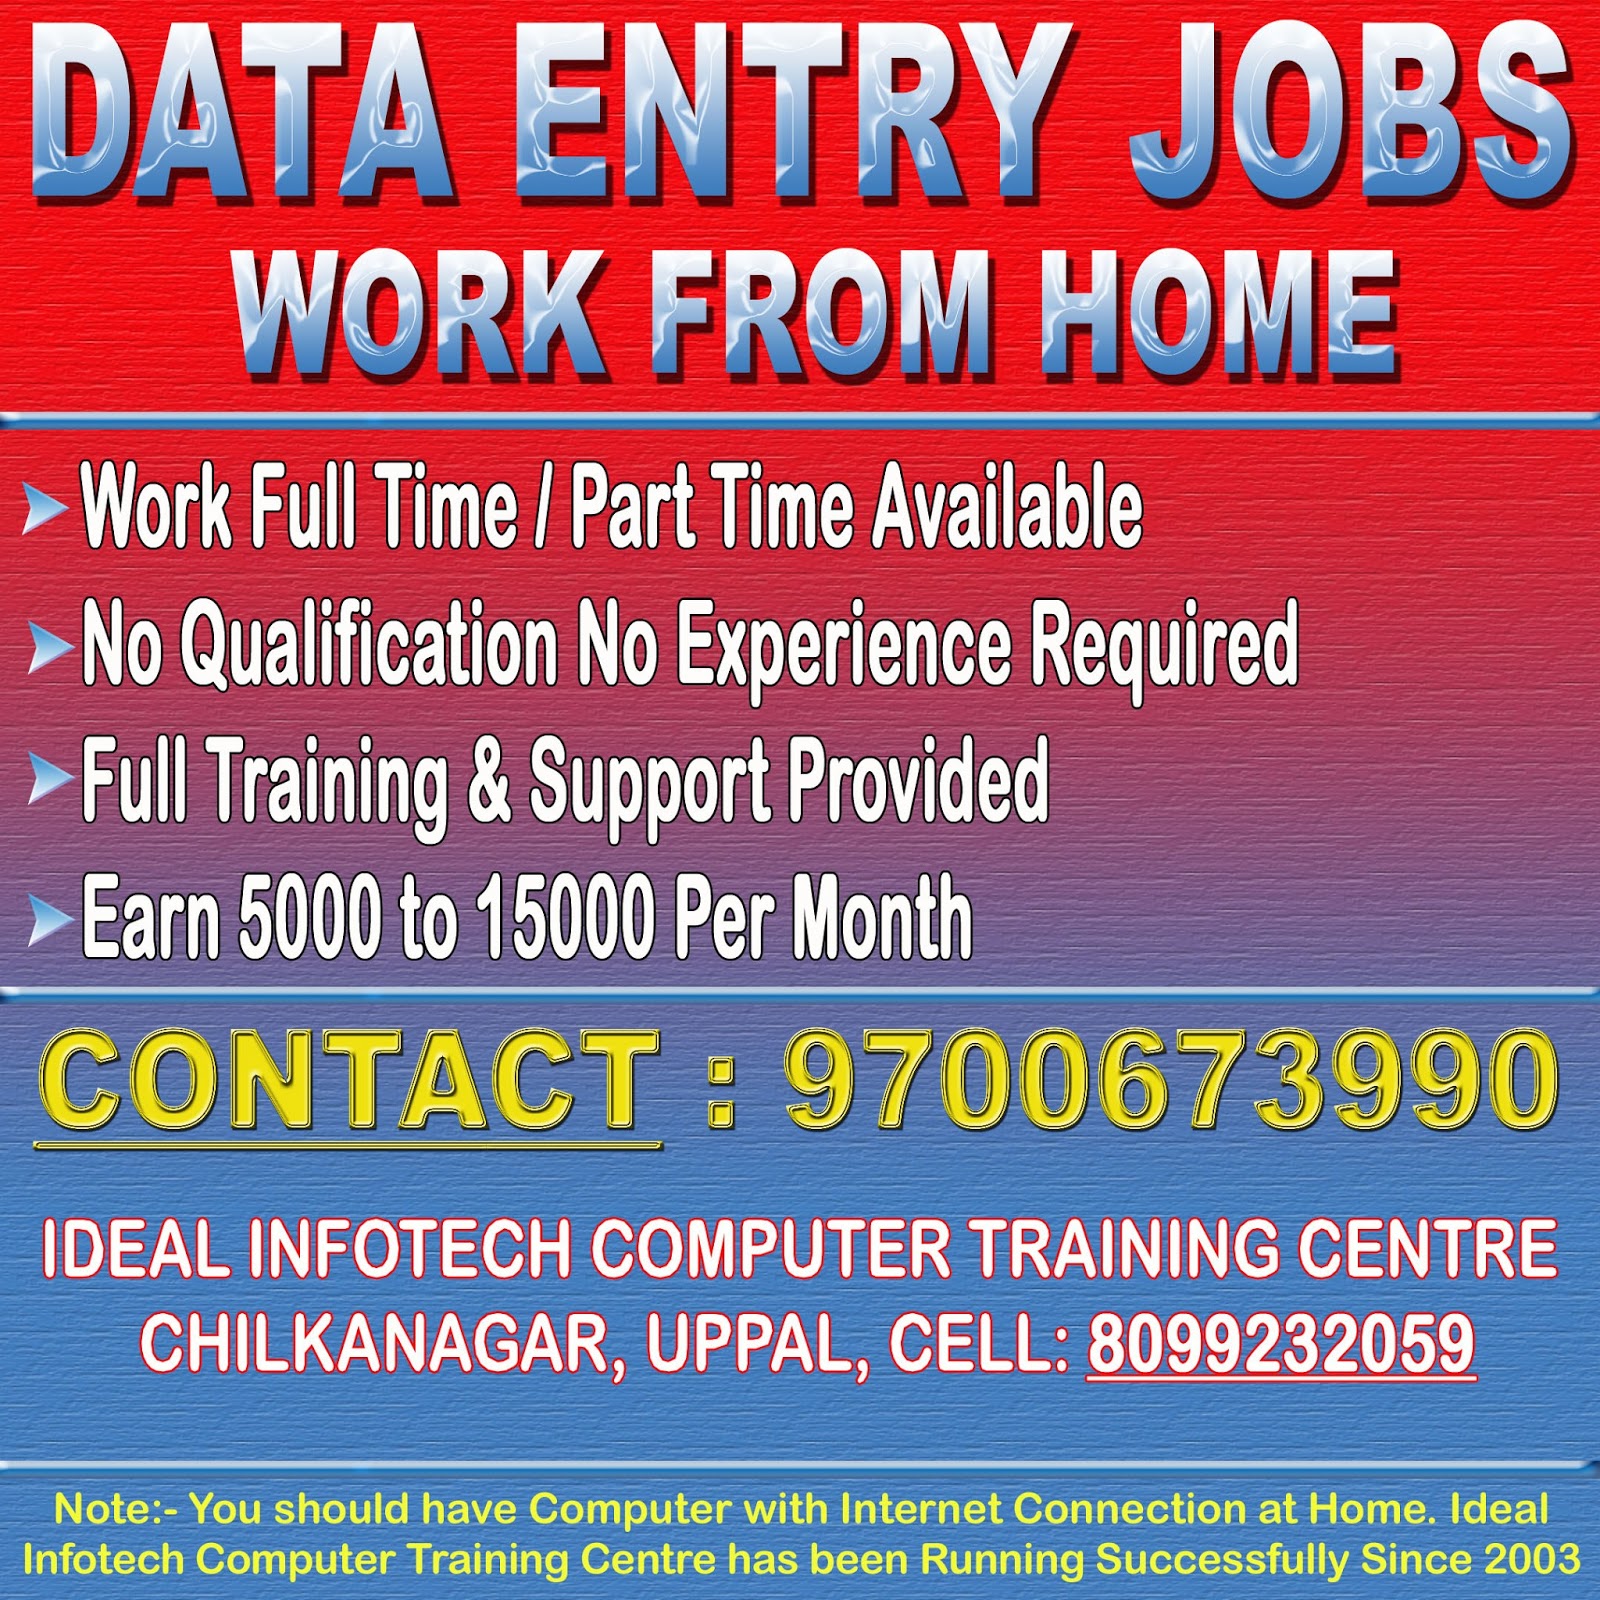 44+ Data Entry Jobs Work From Home Online Pics - Actionable Work From Home